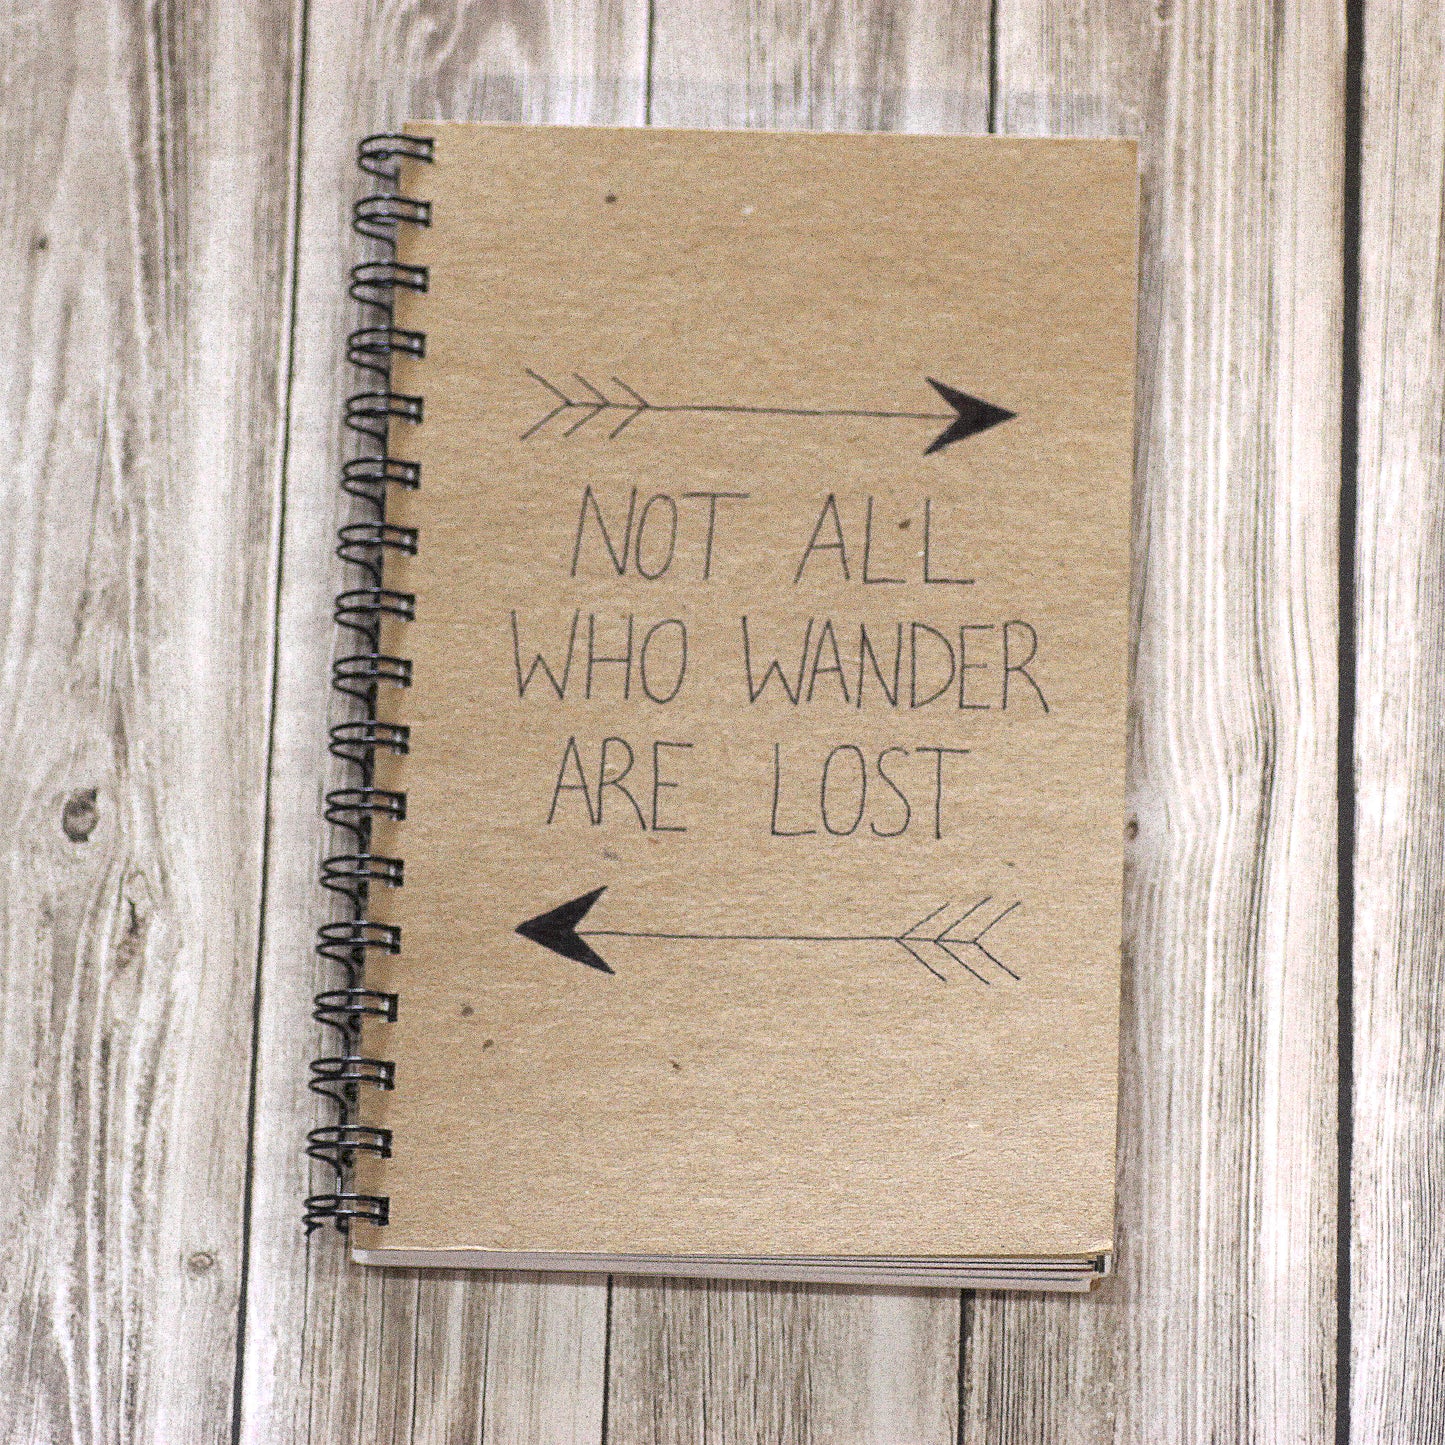 Handmade Upcycled Journal - "Not All Who Wander Are Lost"